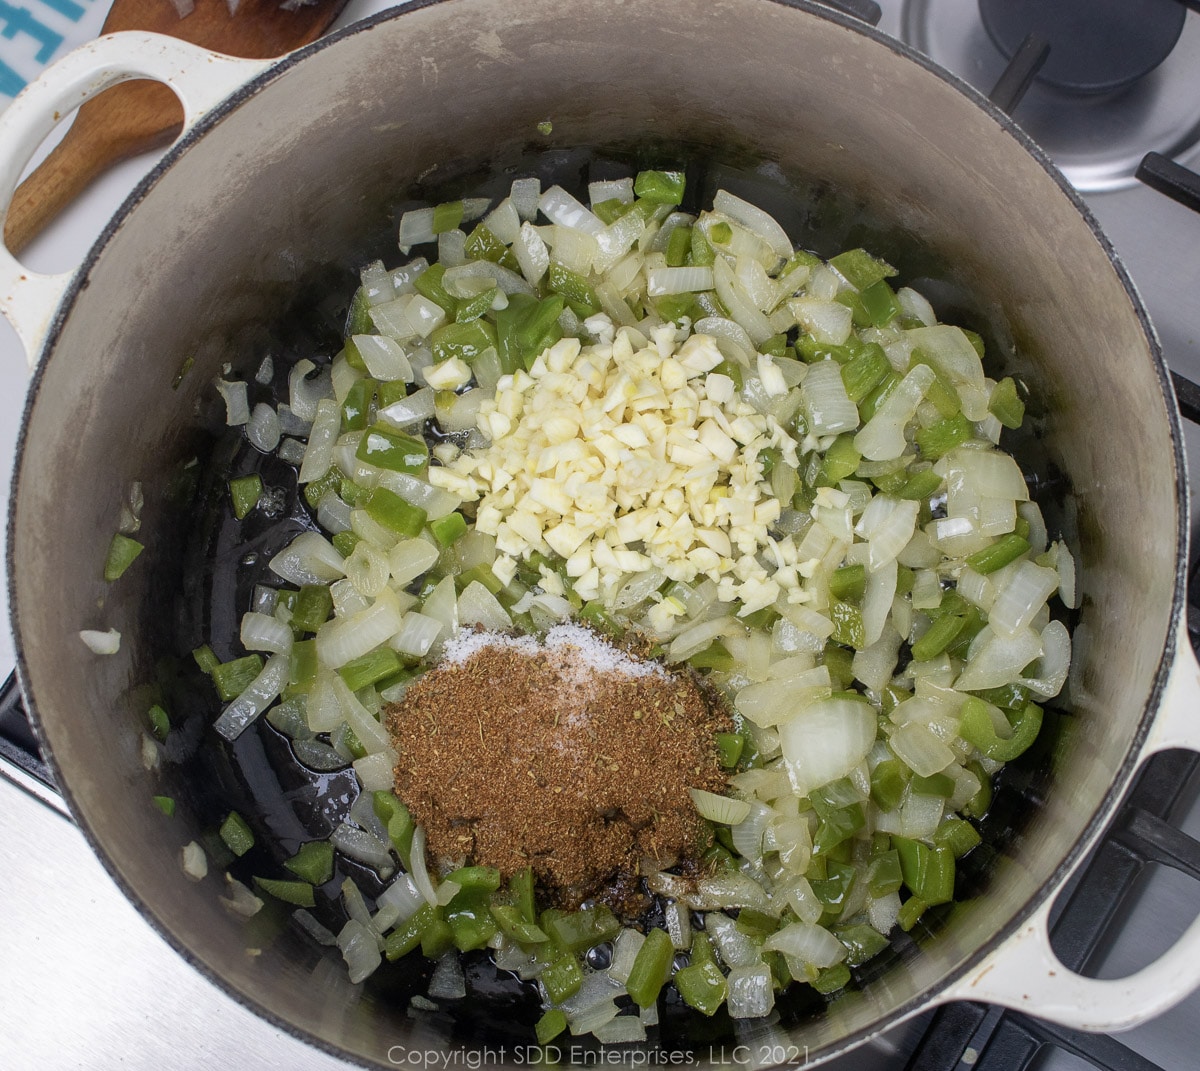 gralic and spices added to sautéing onions in a Dutch oven